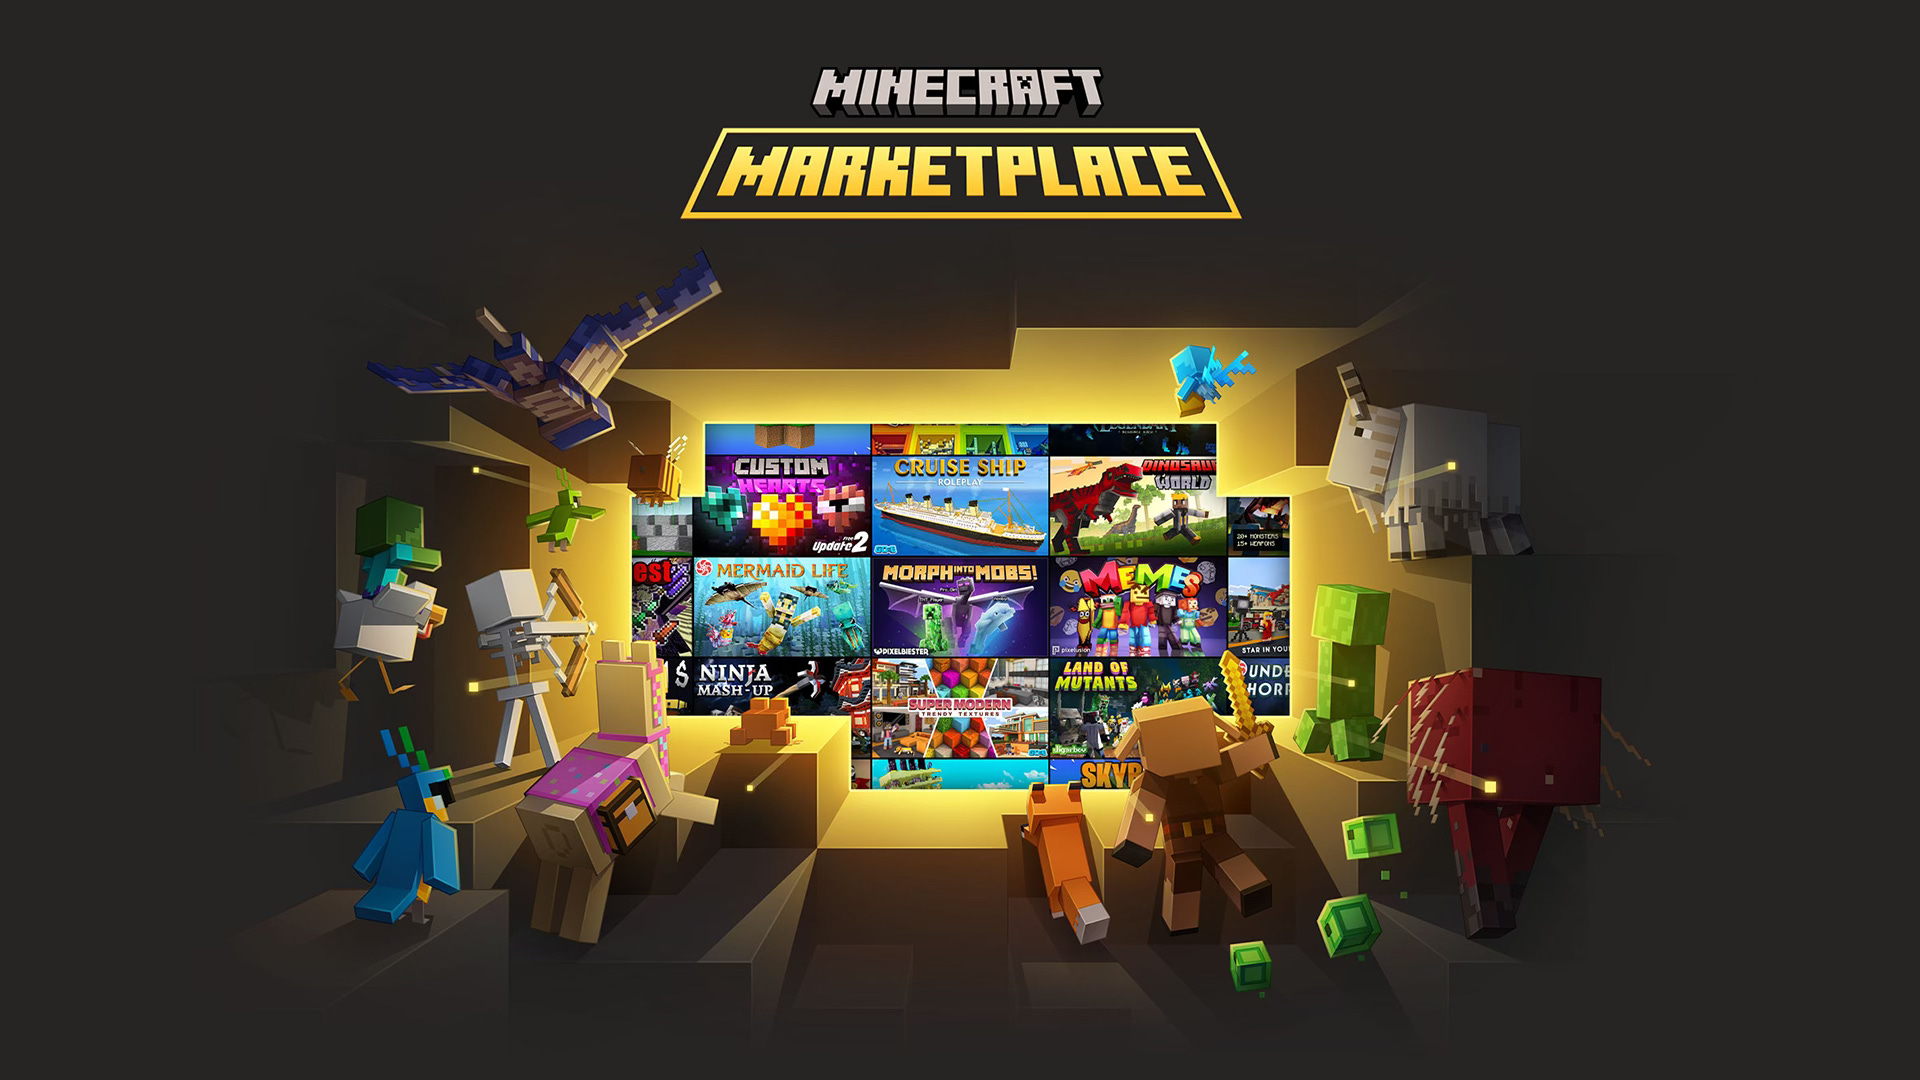 Minecraft Launches Marketplace Pass Subscription, Including Over 150 Content Packs